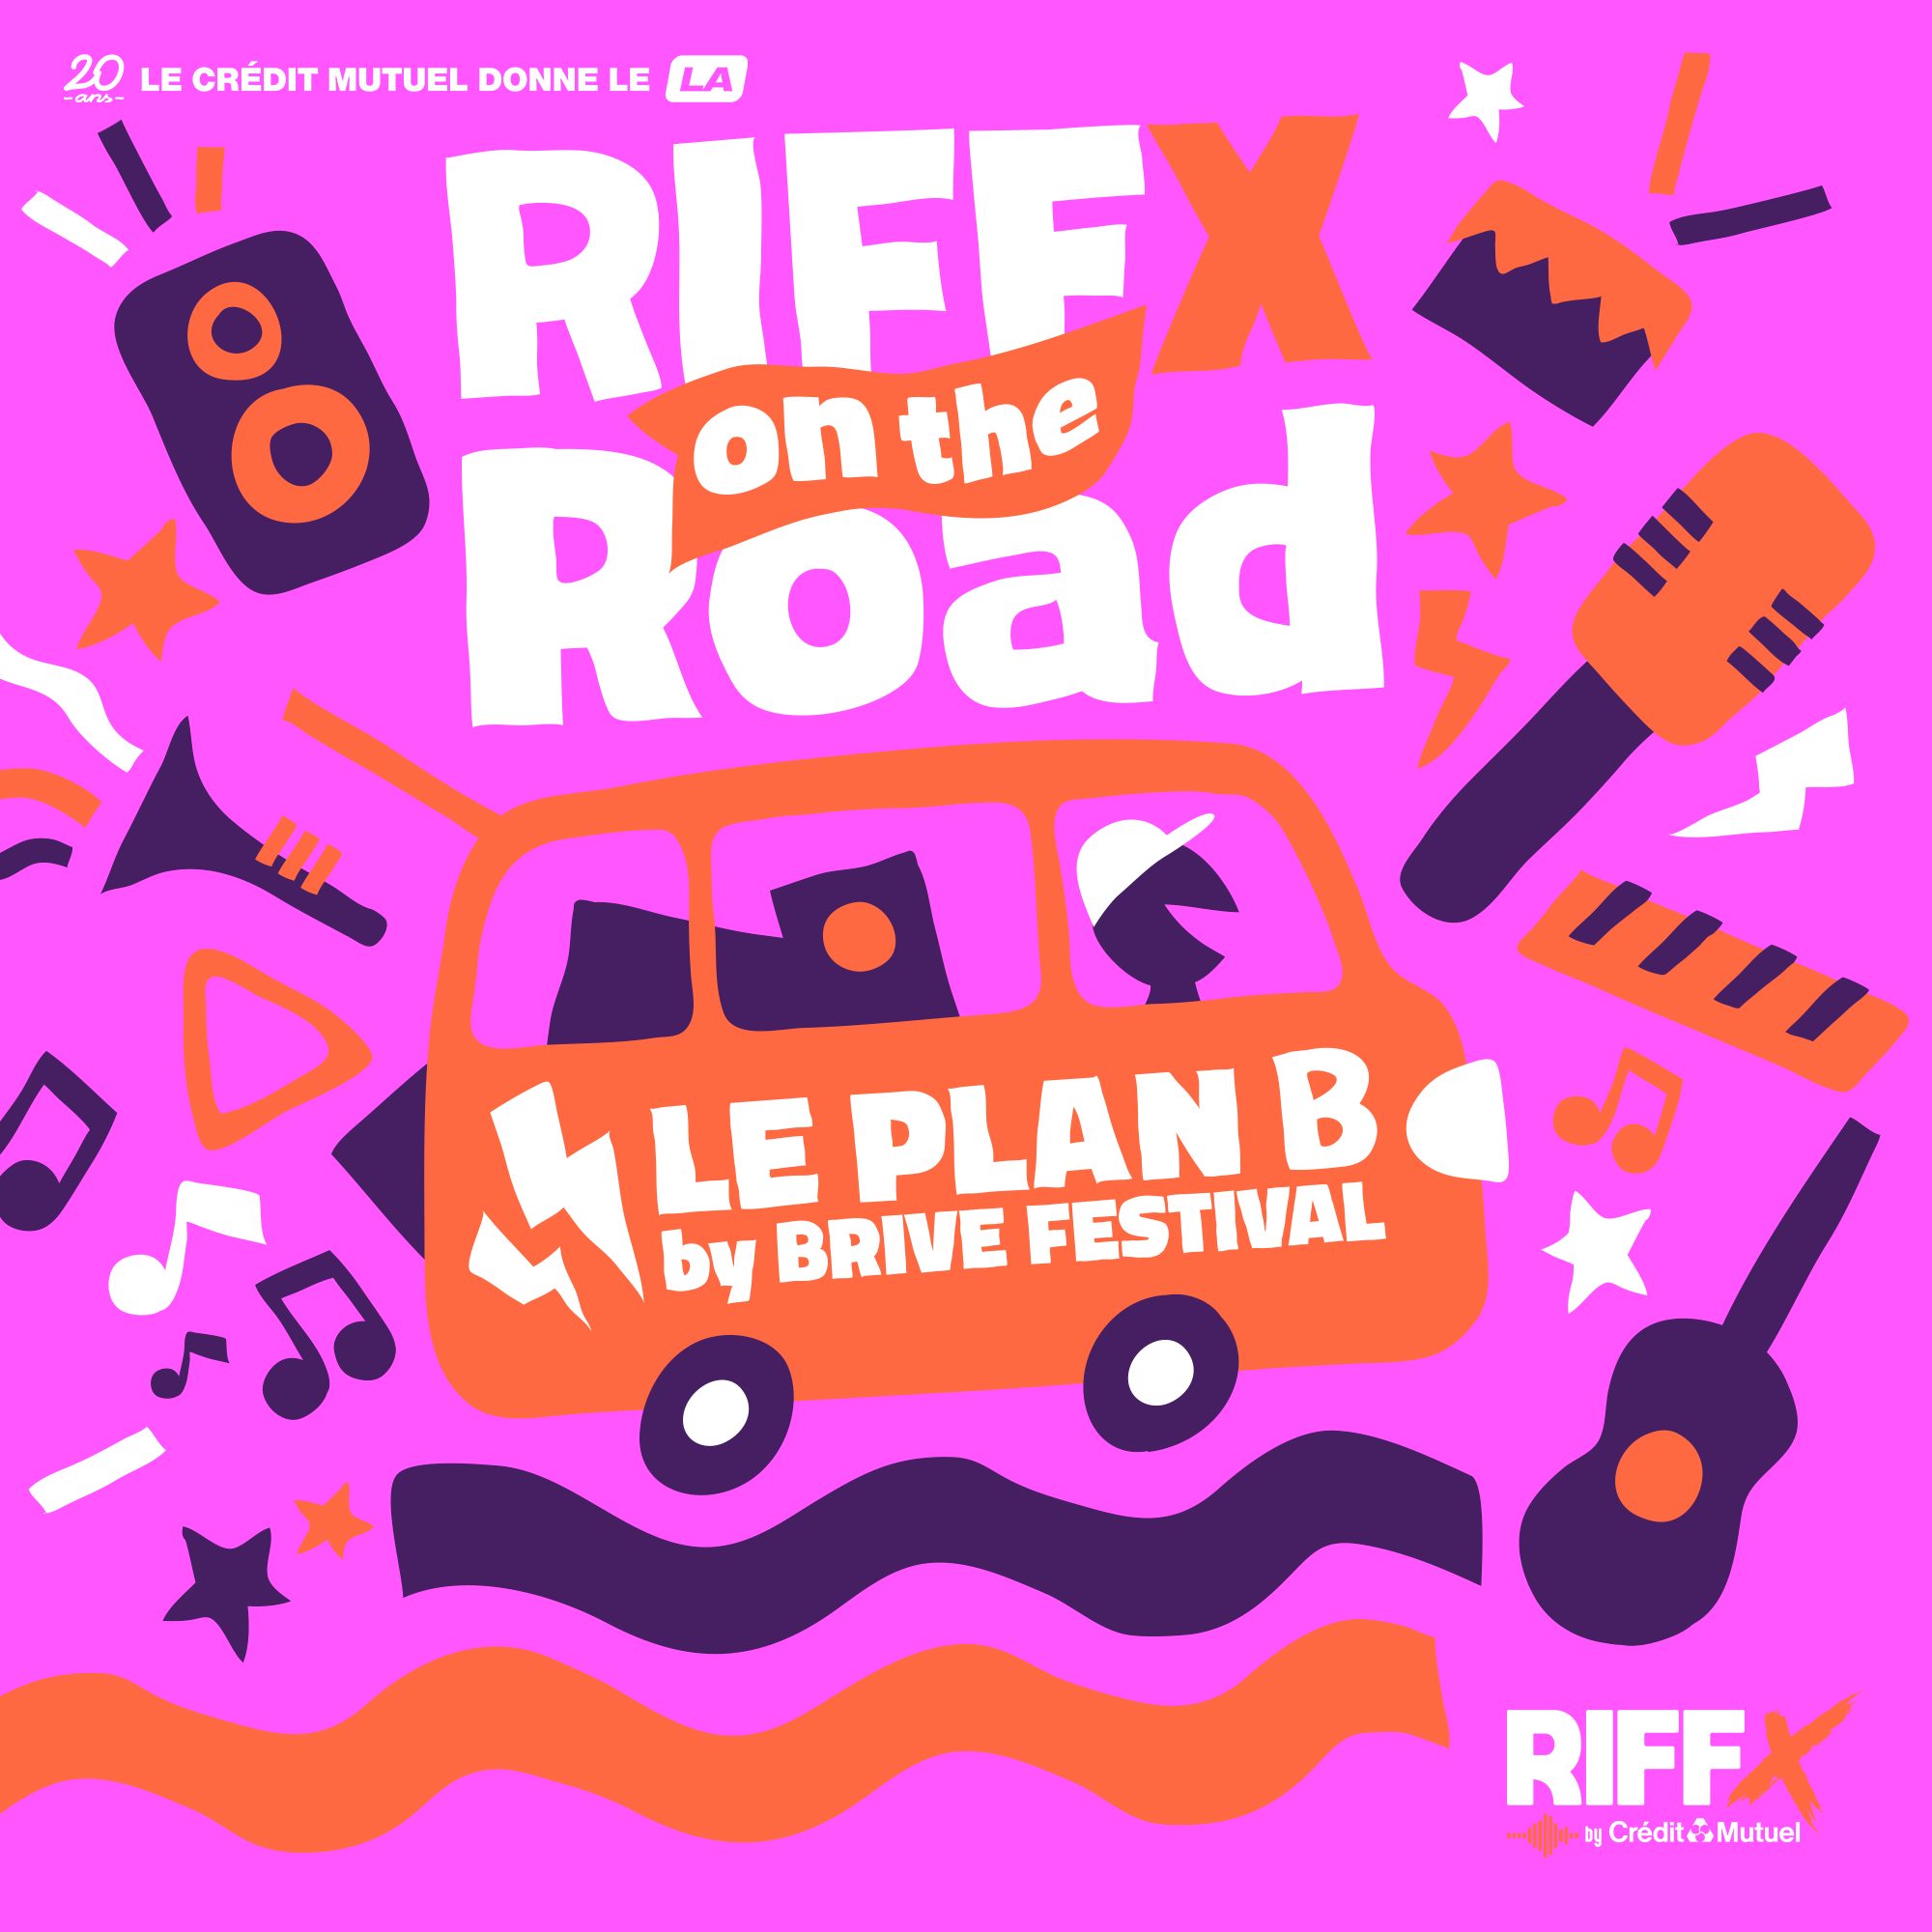 RIFFX on the Road au Plan B by Brive Festival